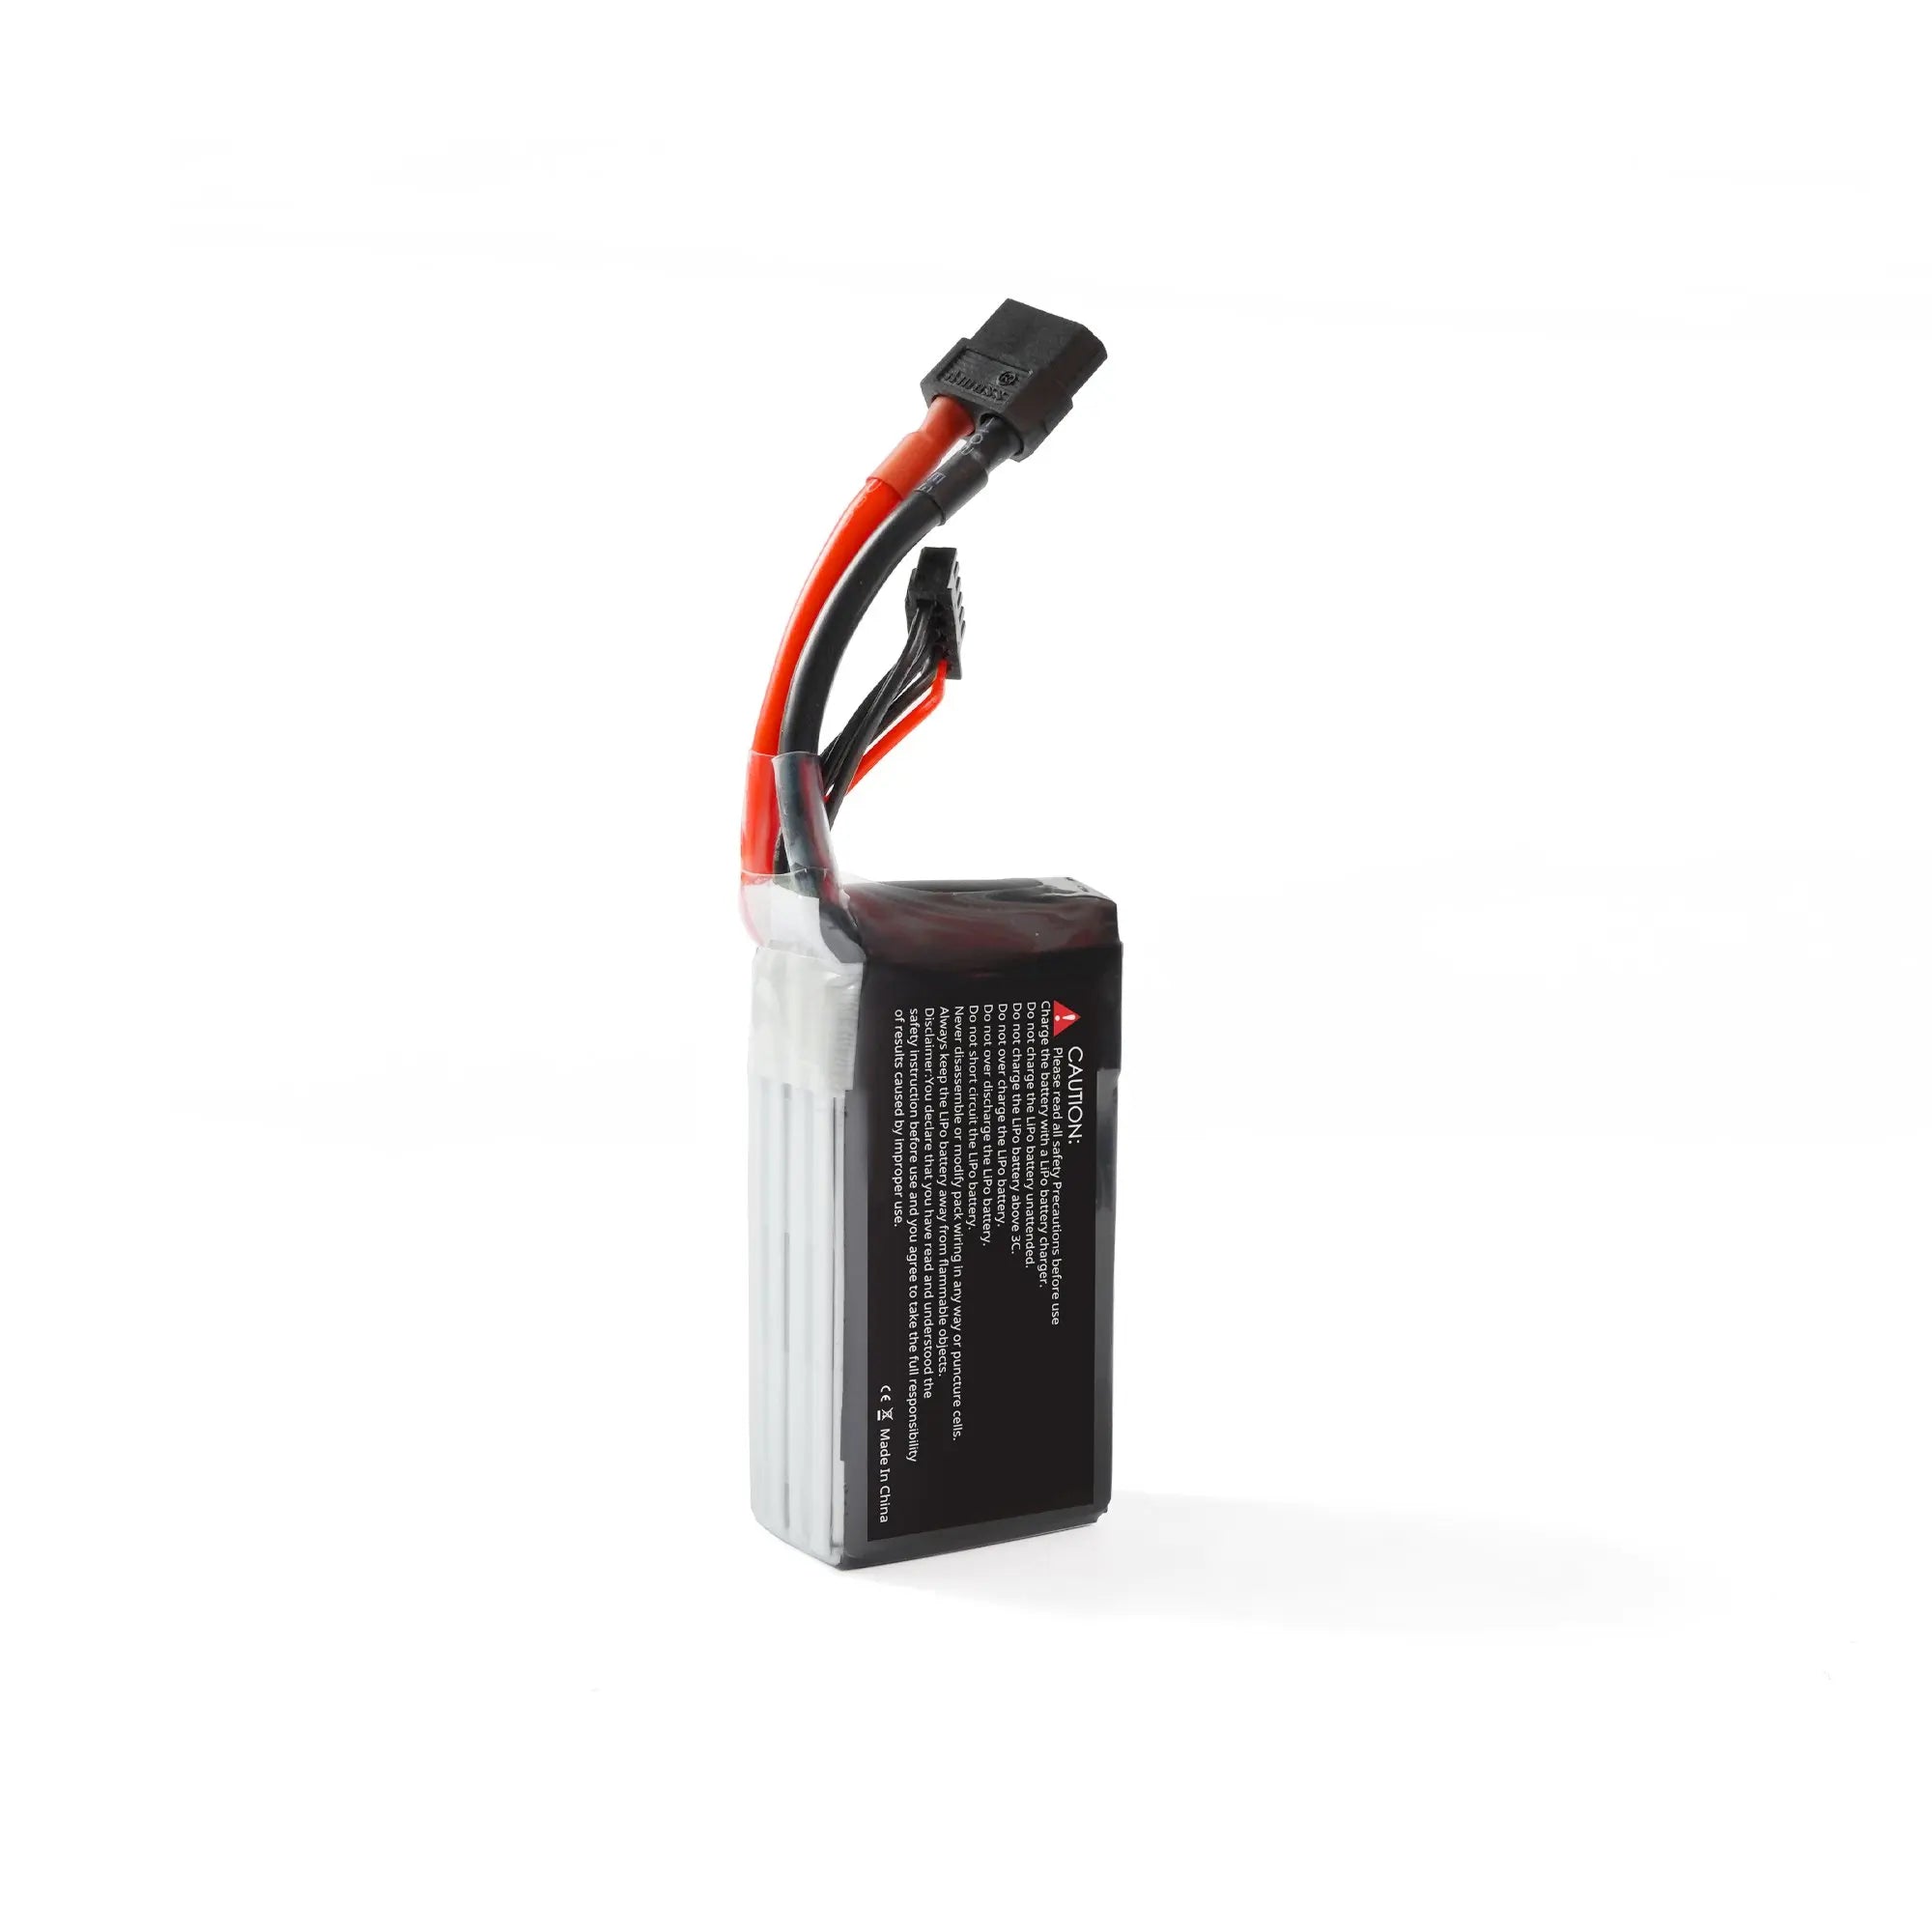 GEPRC Storm 4S 1050mAh 120C Lipo FV Battery, the maximum charging voltage of high voltage battery is 4.3V,and ordinary only 4.2V